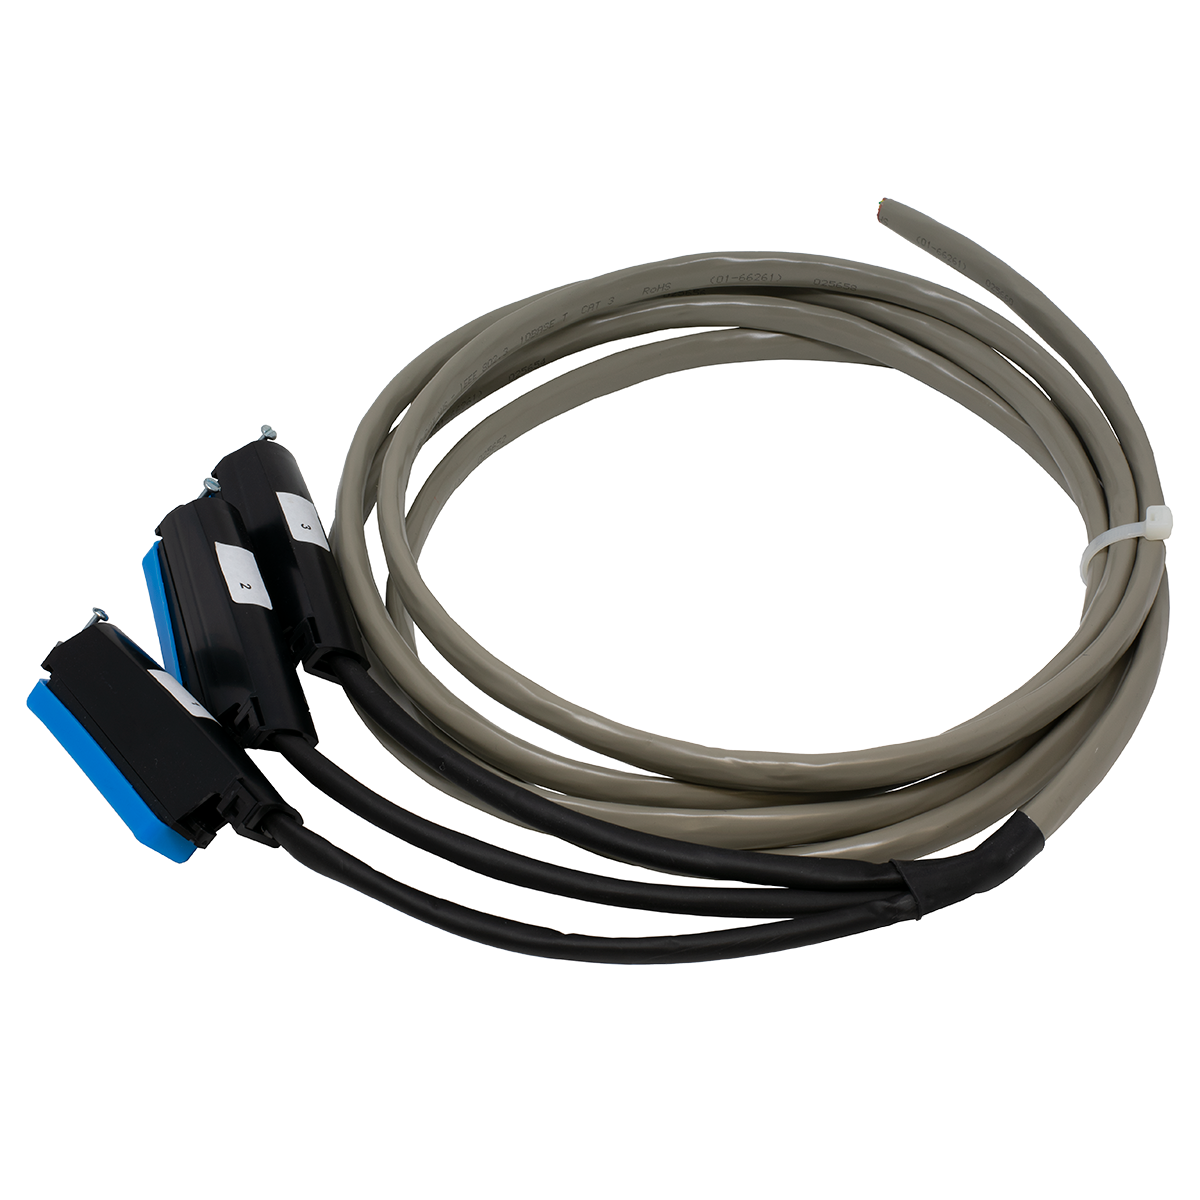 QWIK 10' Toshiba DK Cable